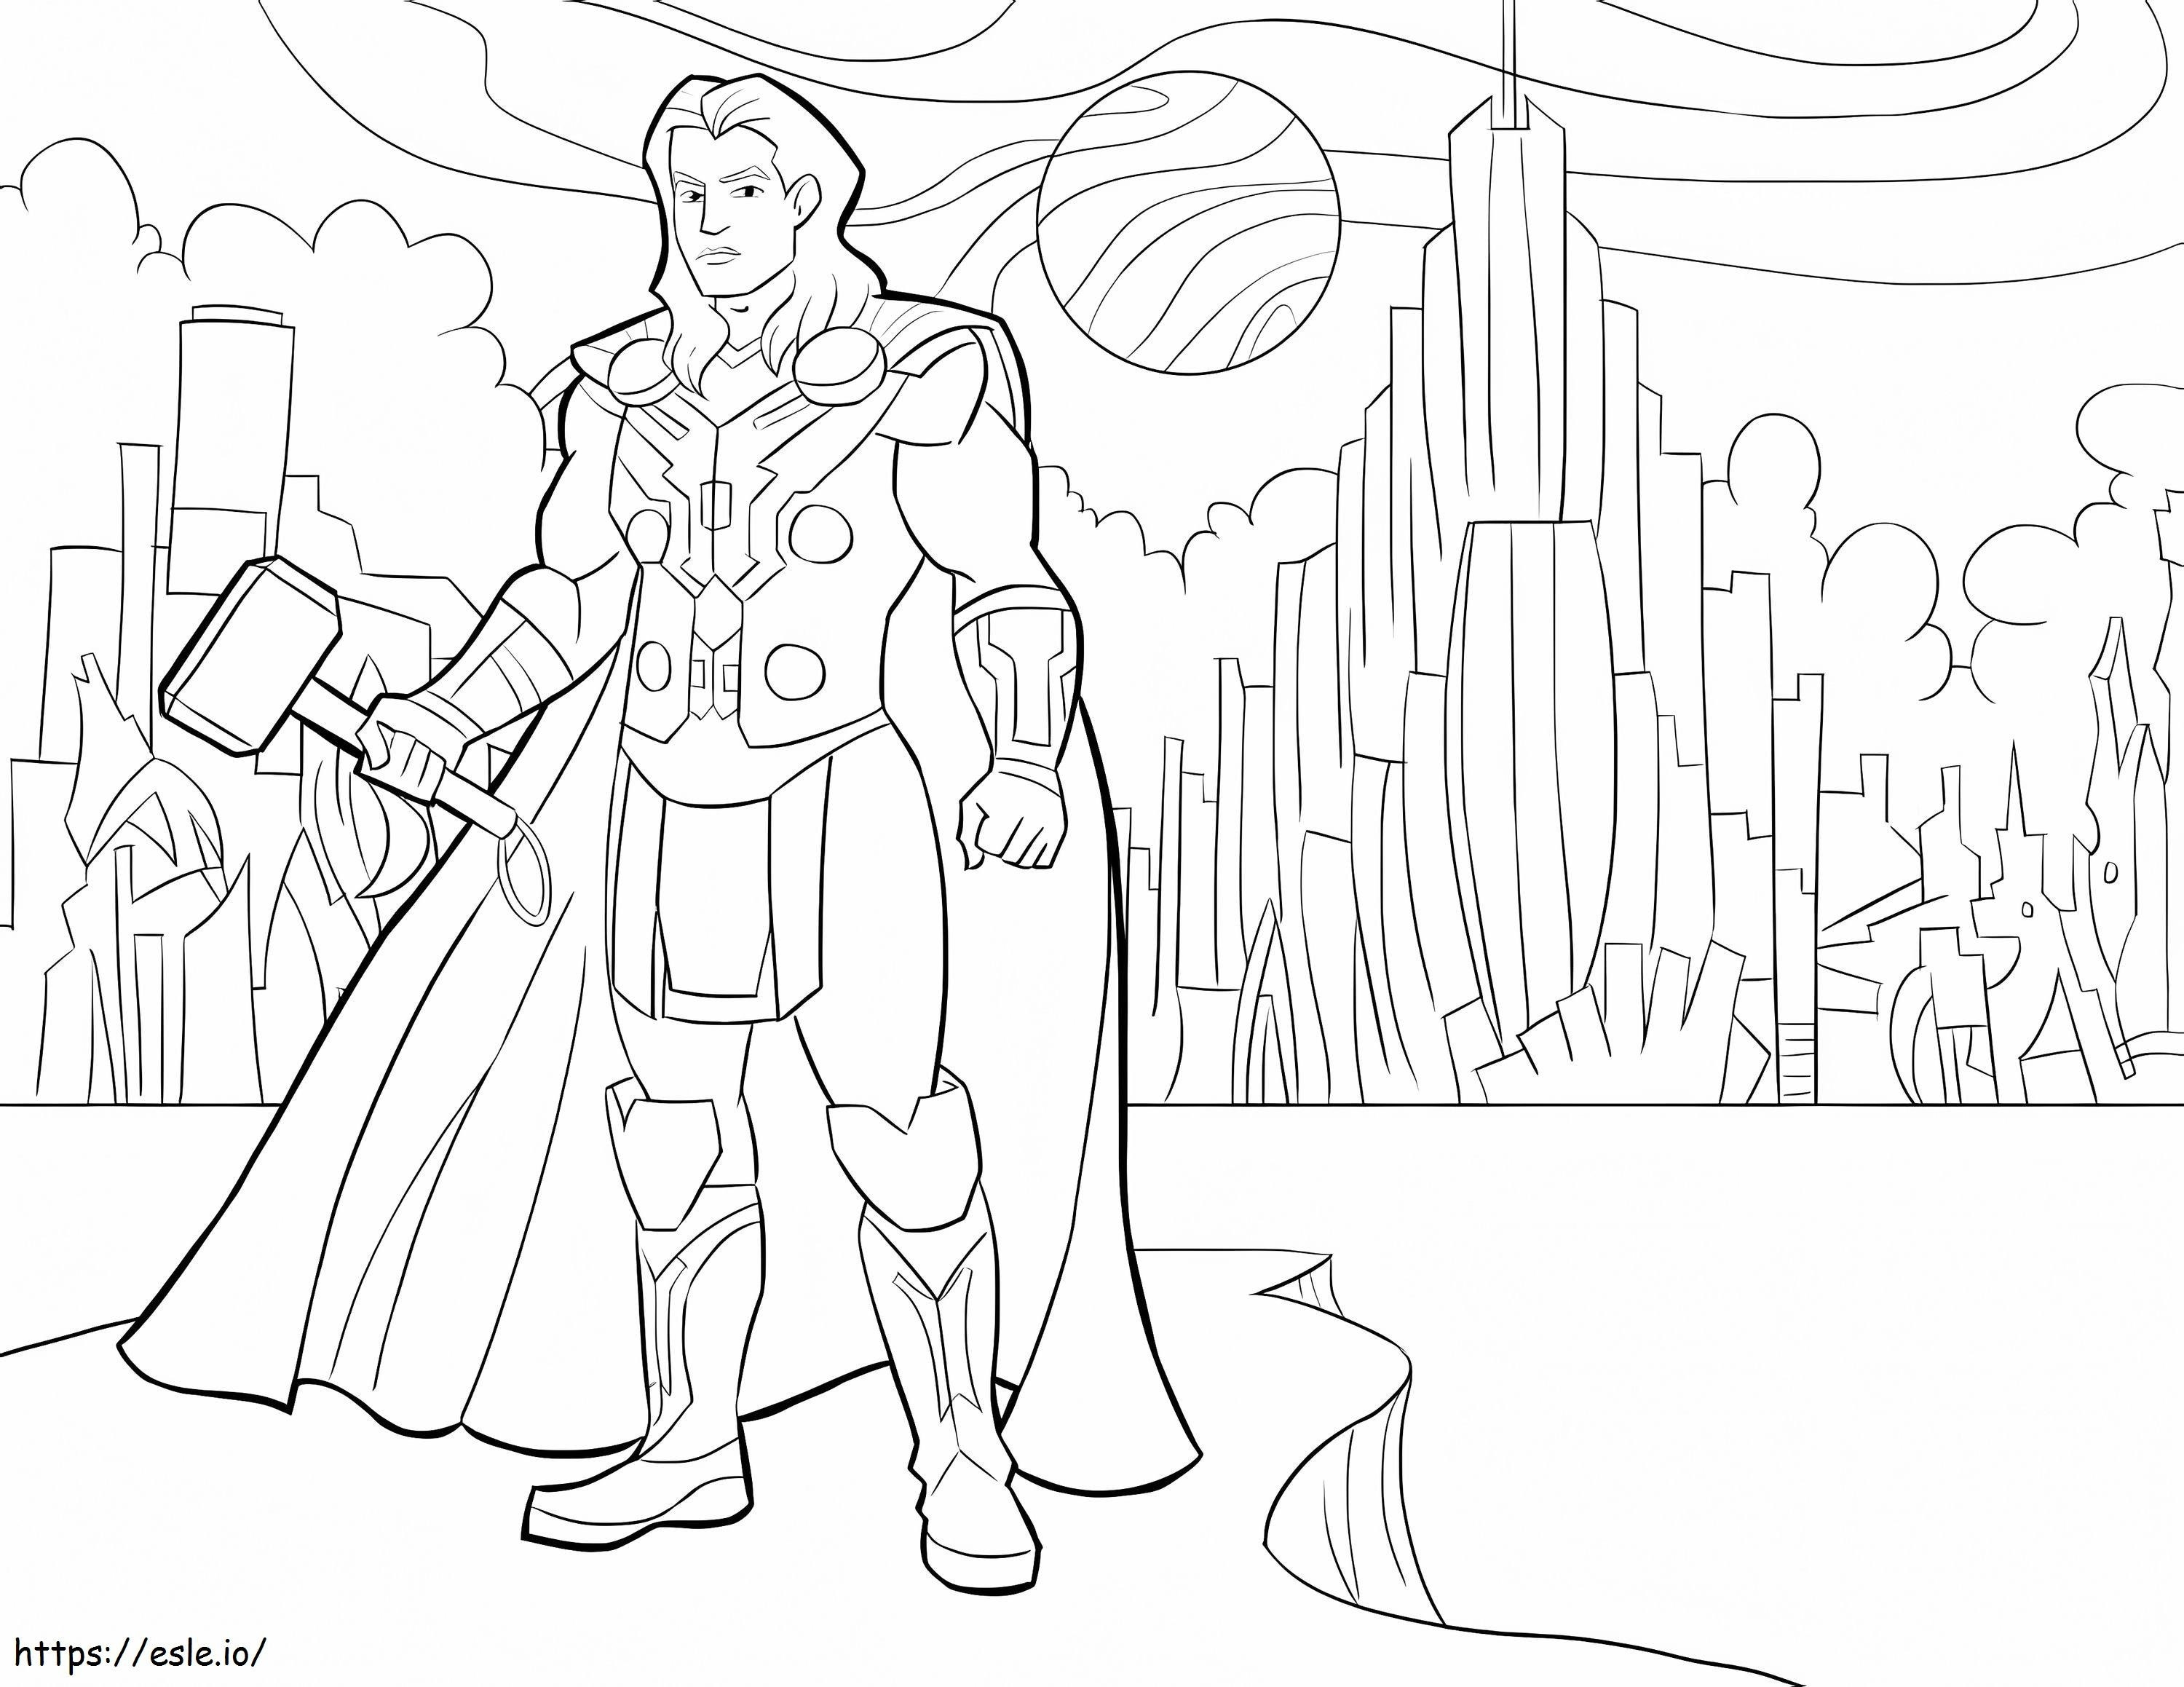 Prince Thor coloring page